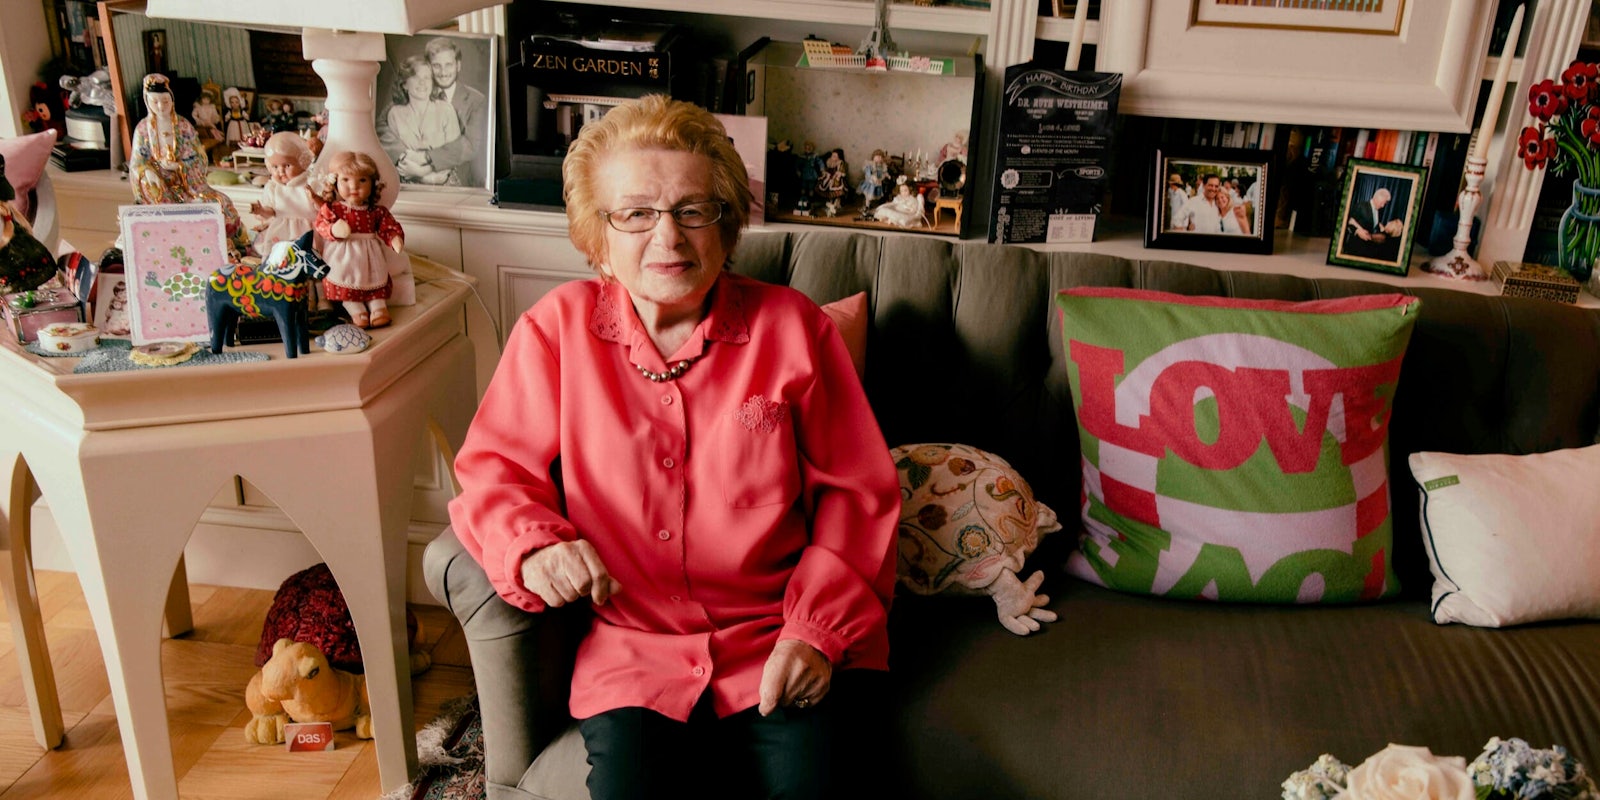 what's new on hulu june 2019 - ask dr. ruth